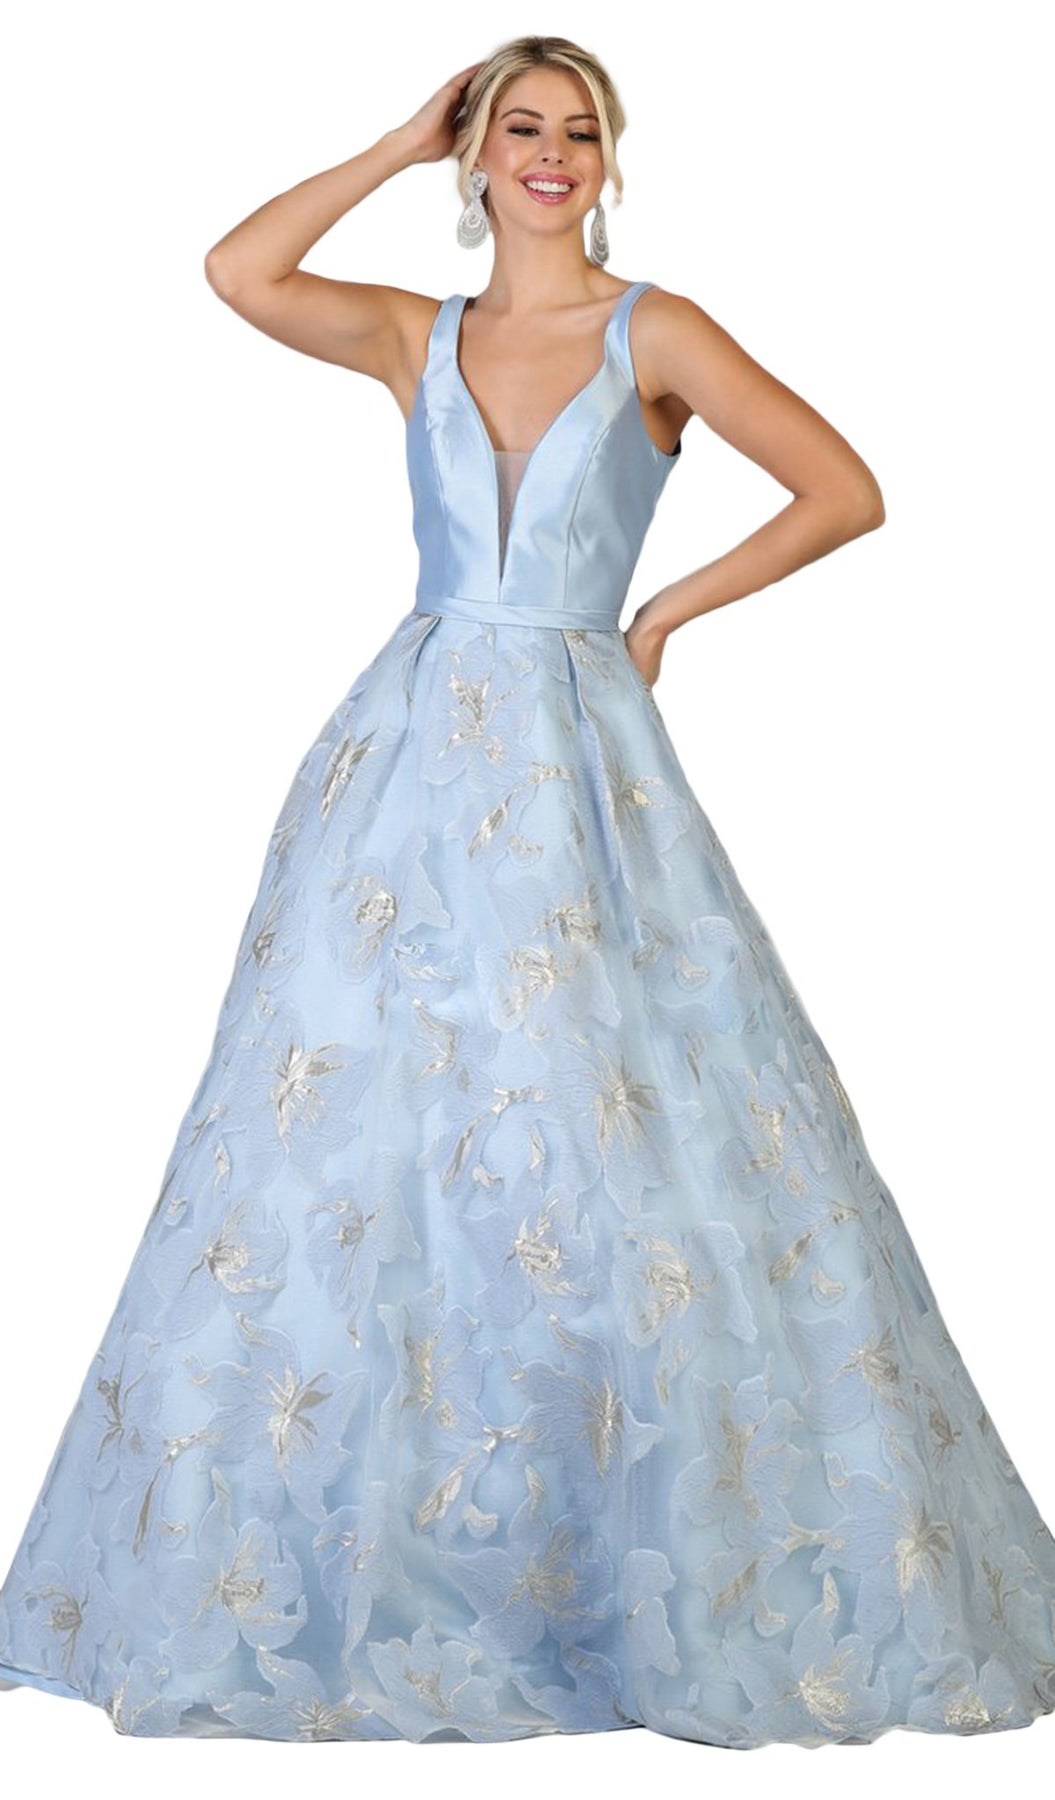 May Queen - RQ7730 Plunging V-Neck Floral Ballgown In Blue